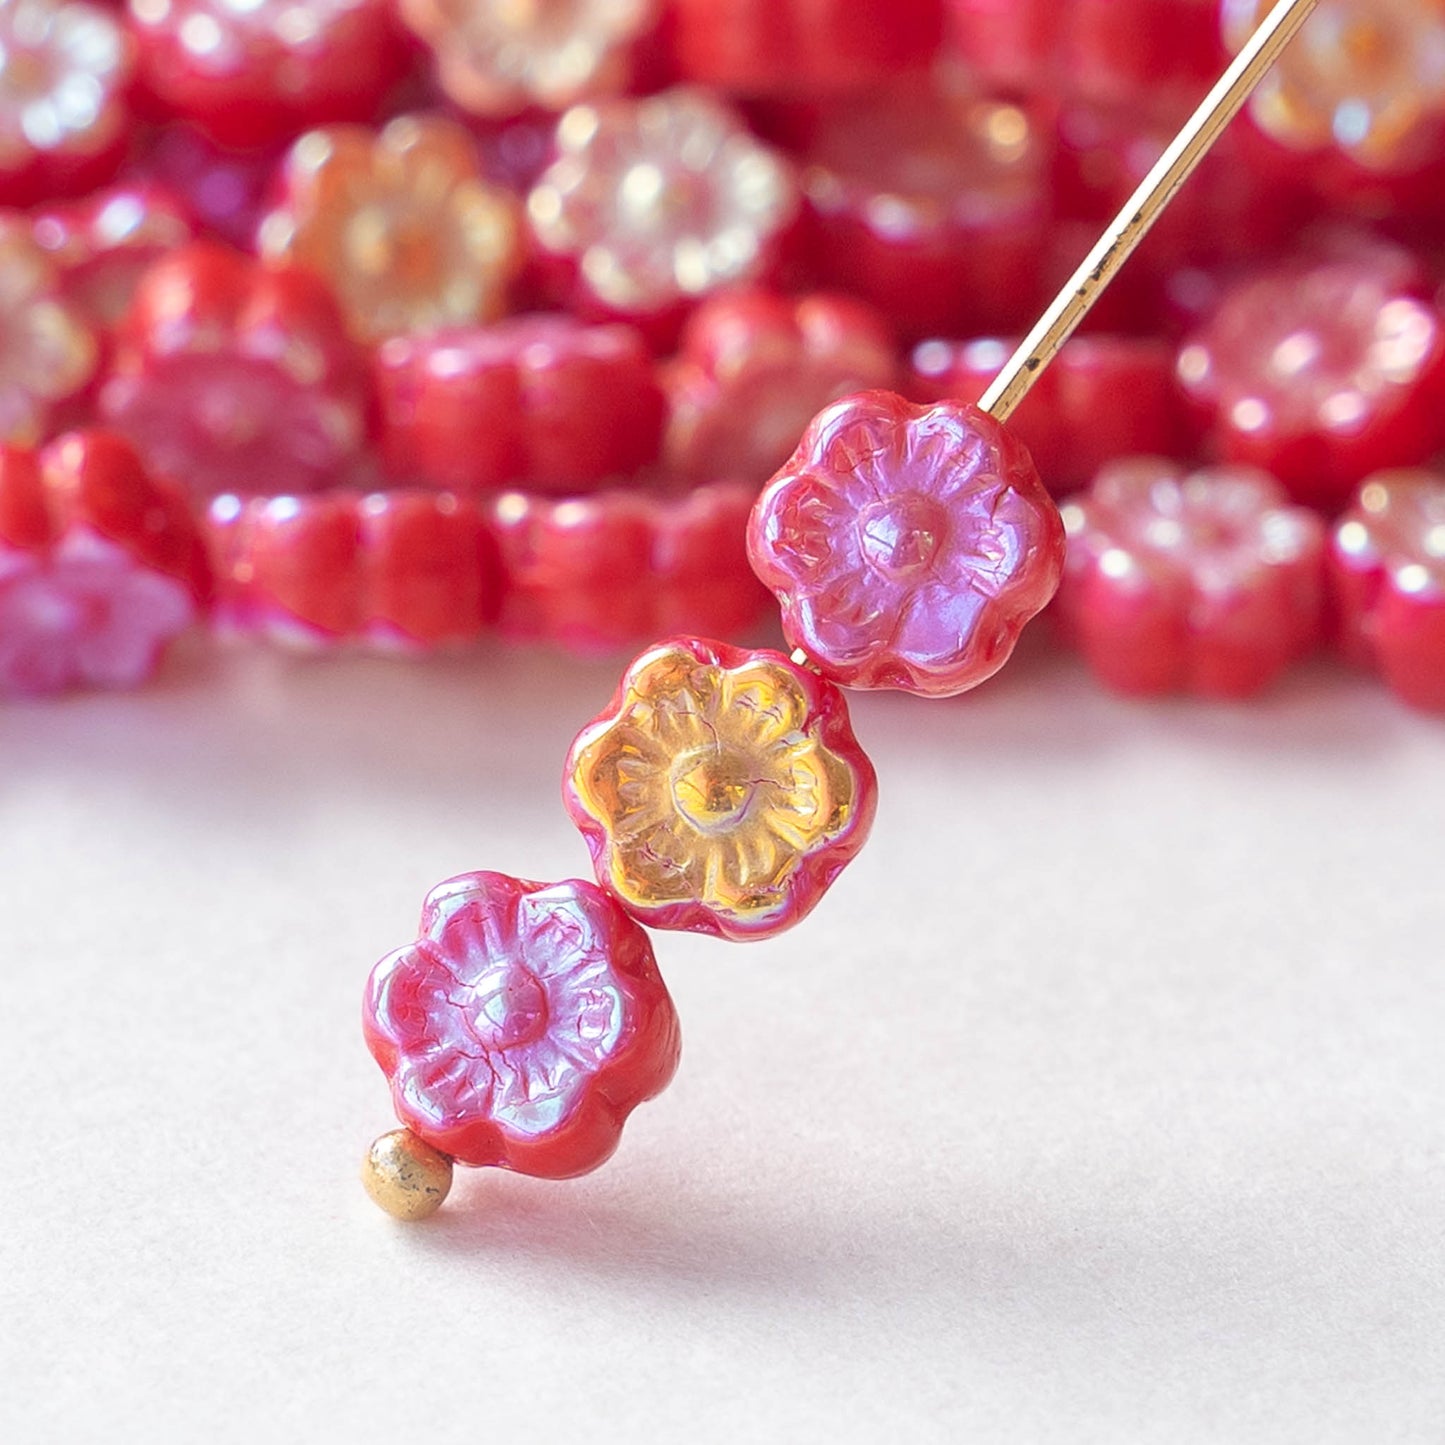 8mm Flower Beads - Opaque Red Luster AB - 20